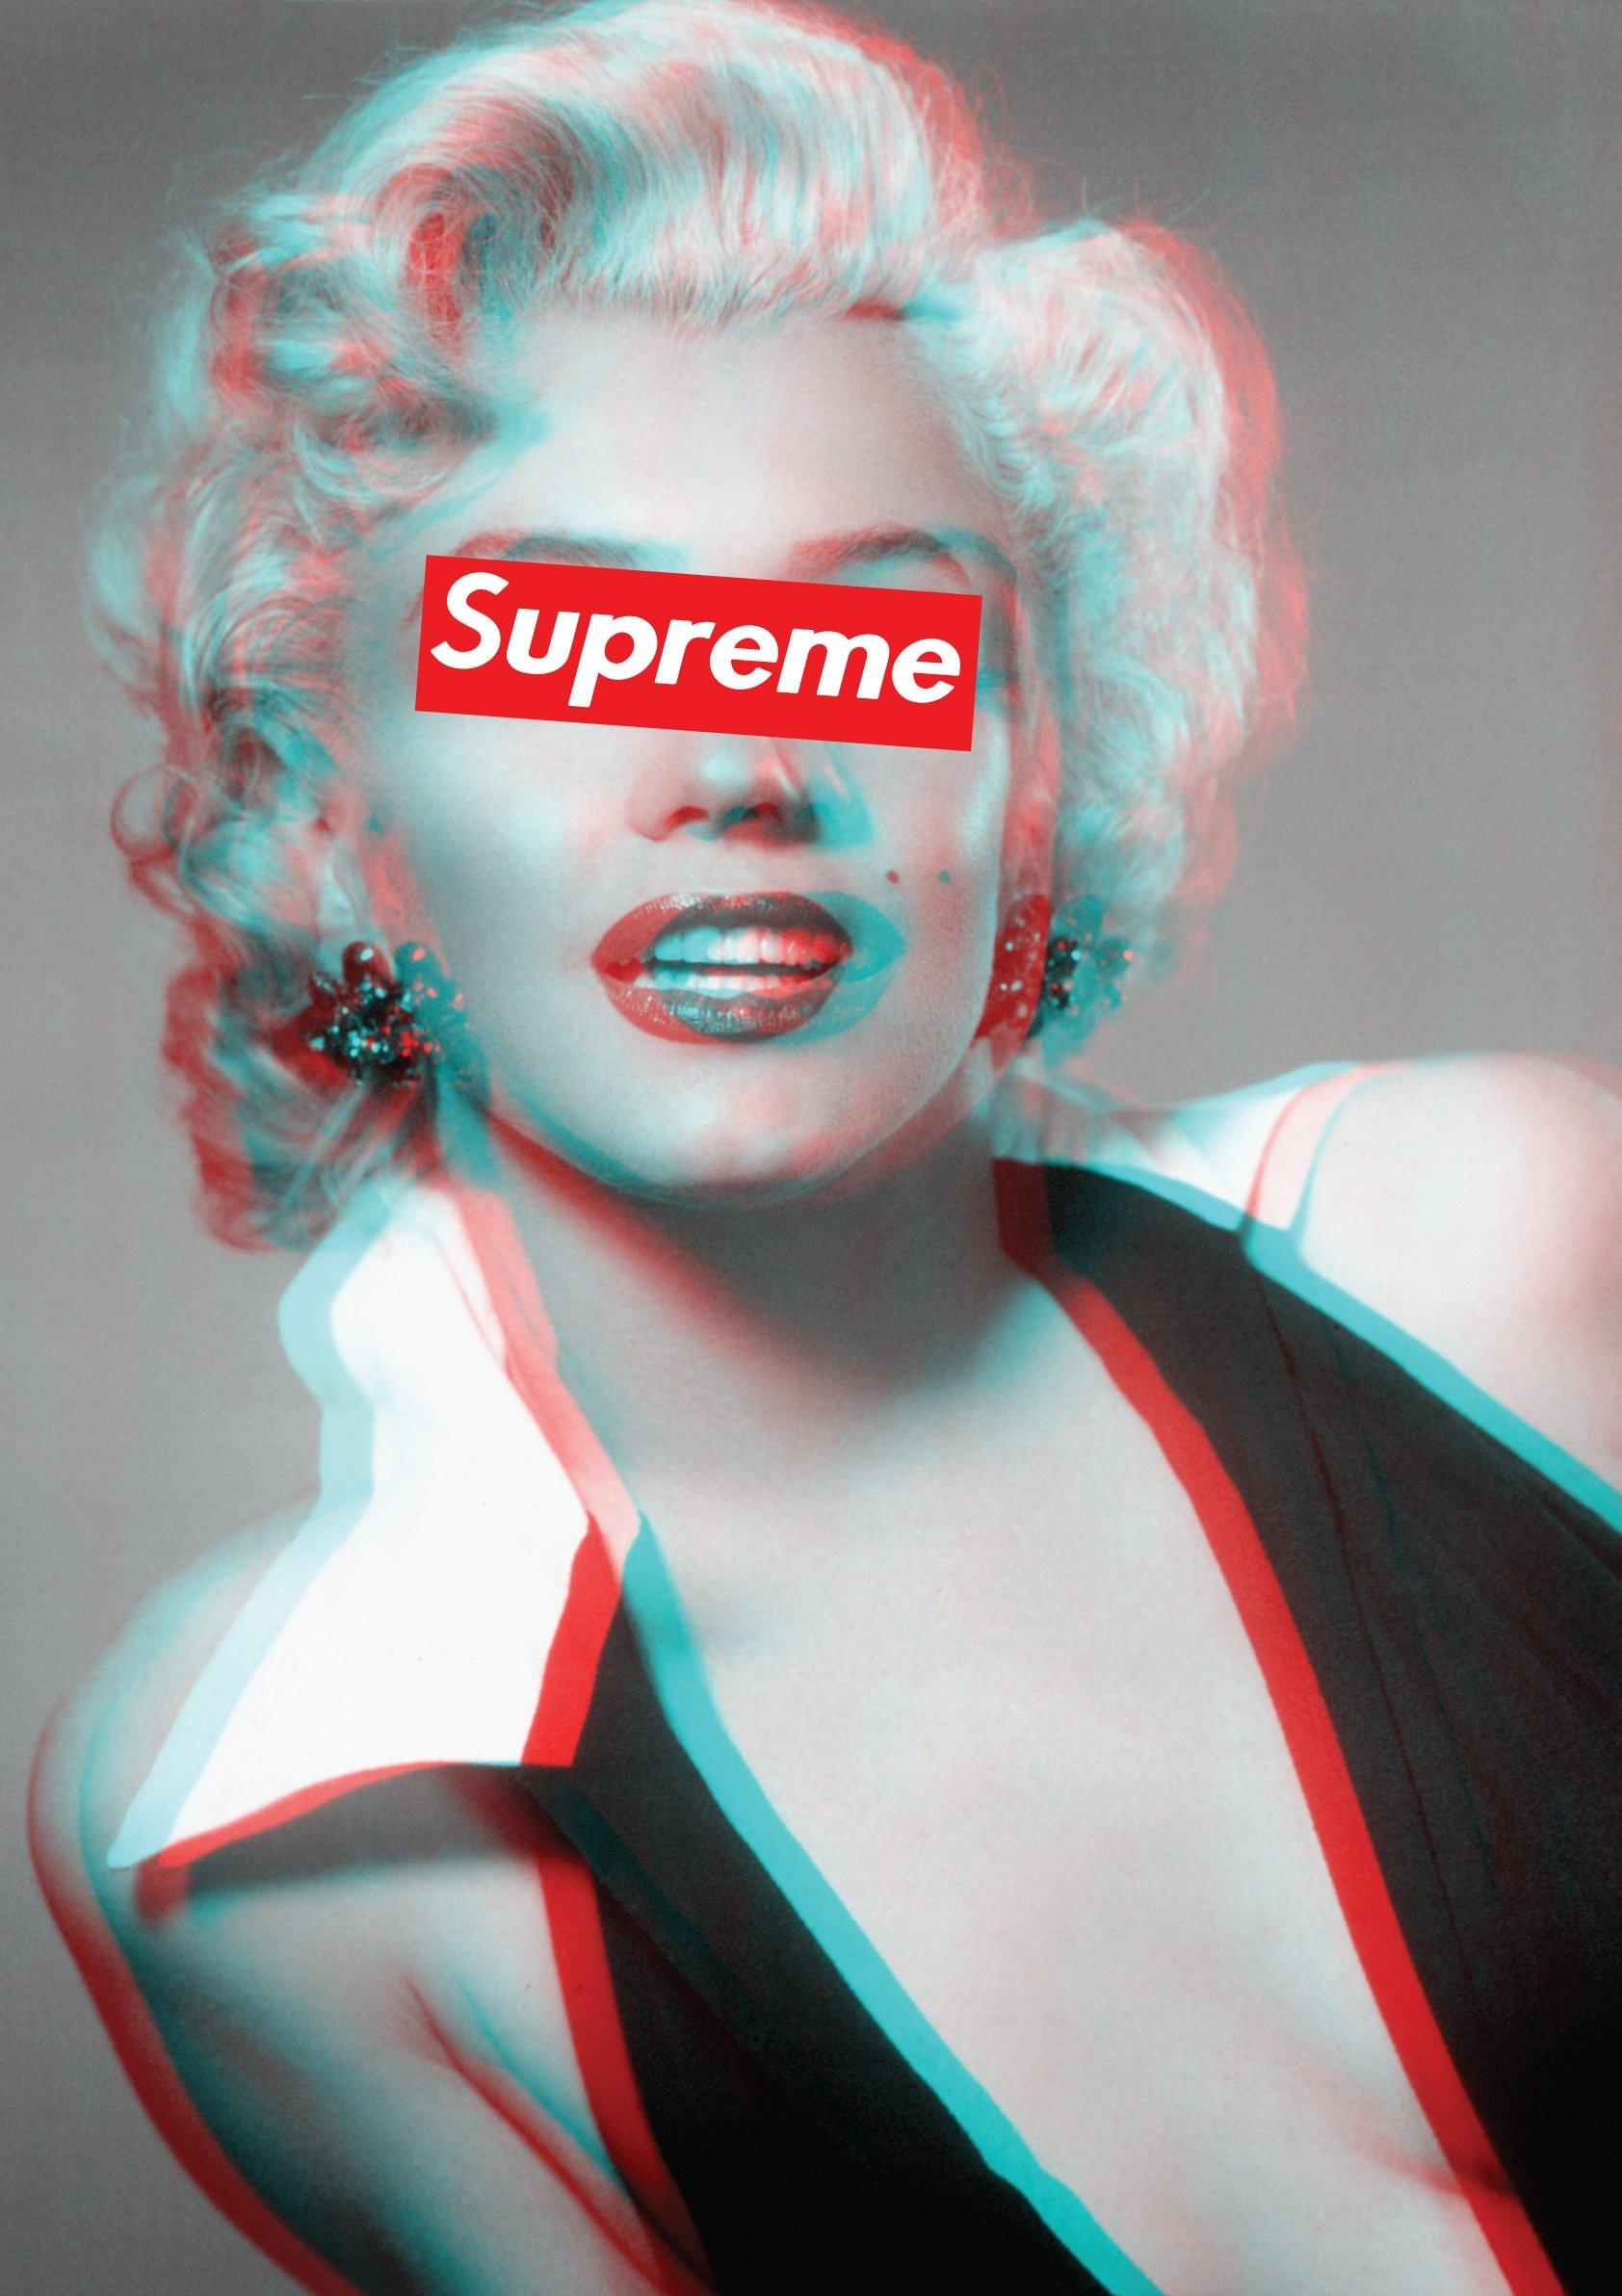 1684x2384 Marilyn Monroe Supreme Classic Iconic Poster A1 Large Glossy